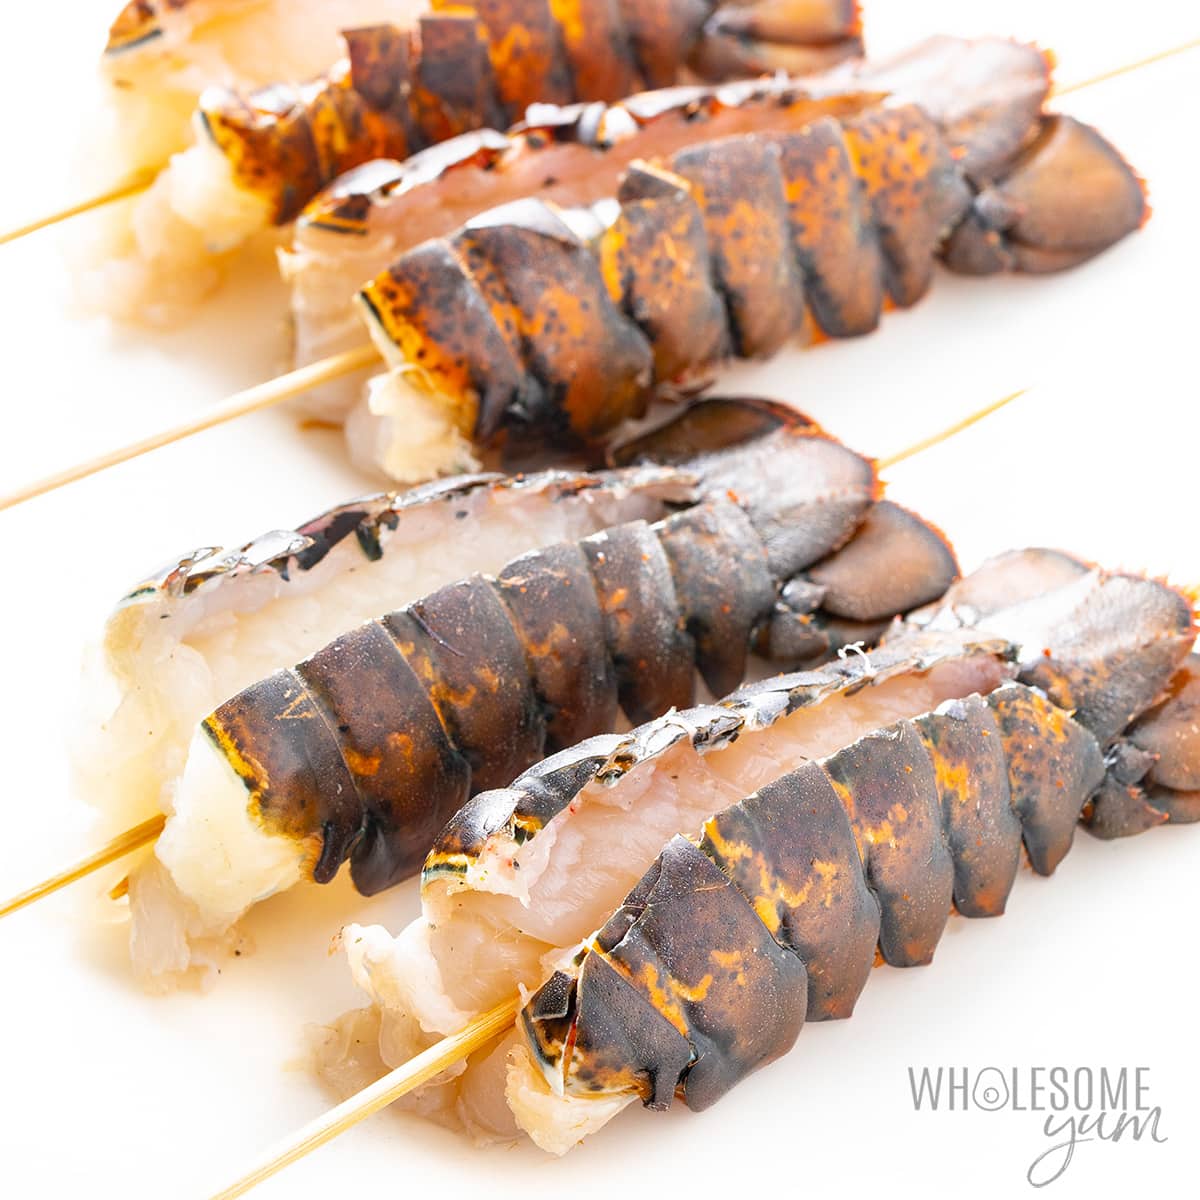 Butterflied lobster tails with wooden skewers through them.